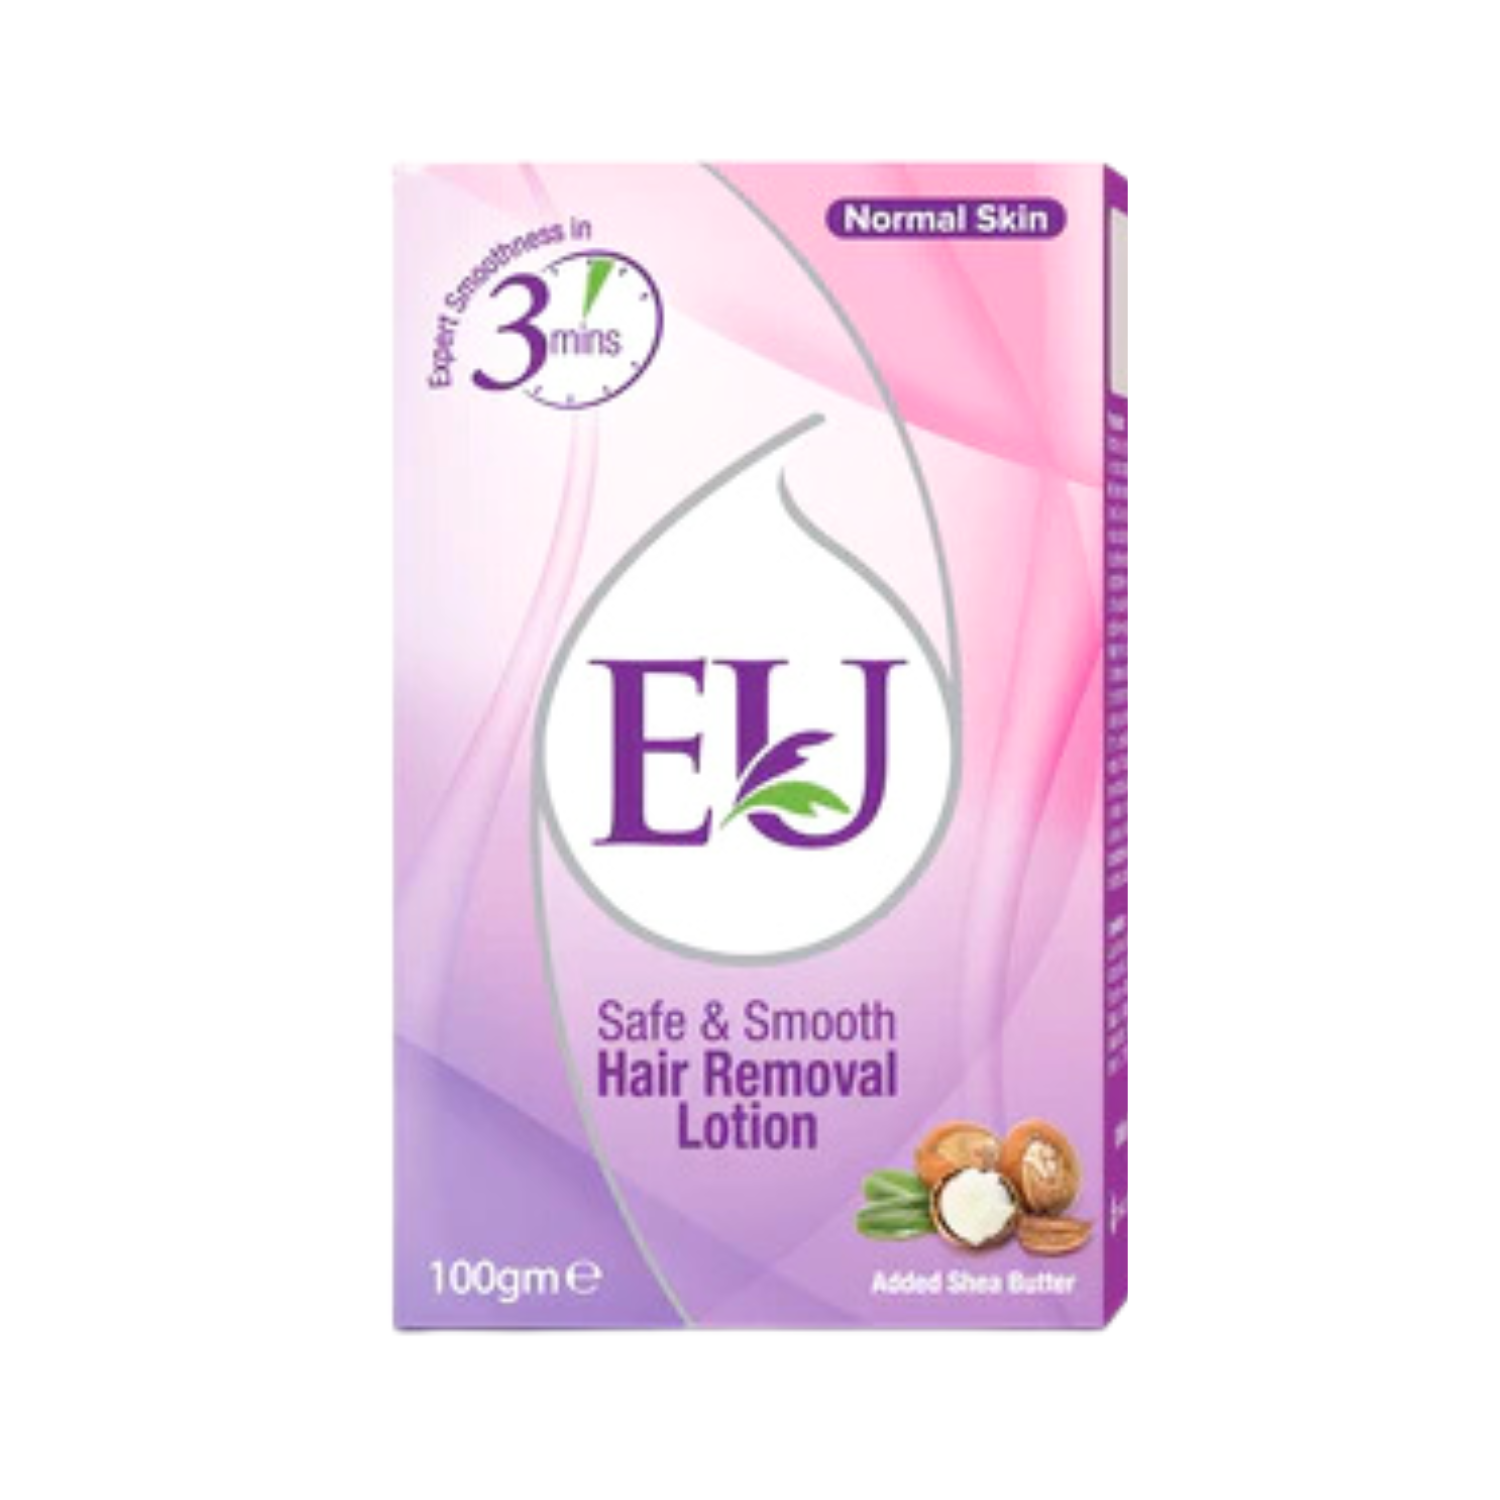 eu-safe-smooth-normal-skin-hair-removal-lotion-100g